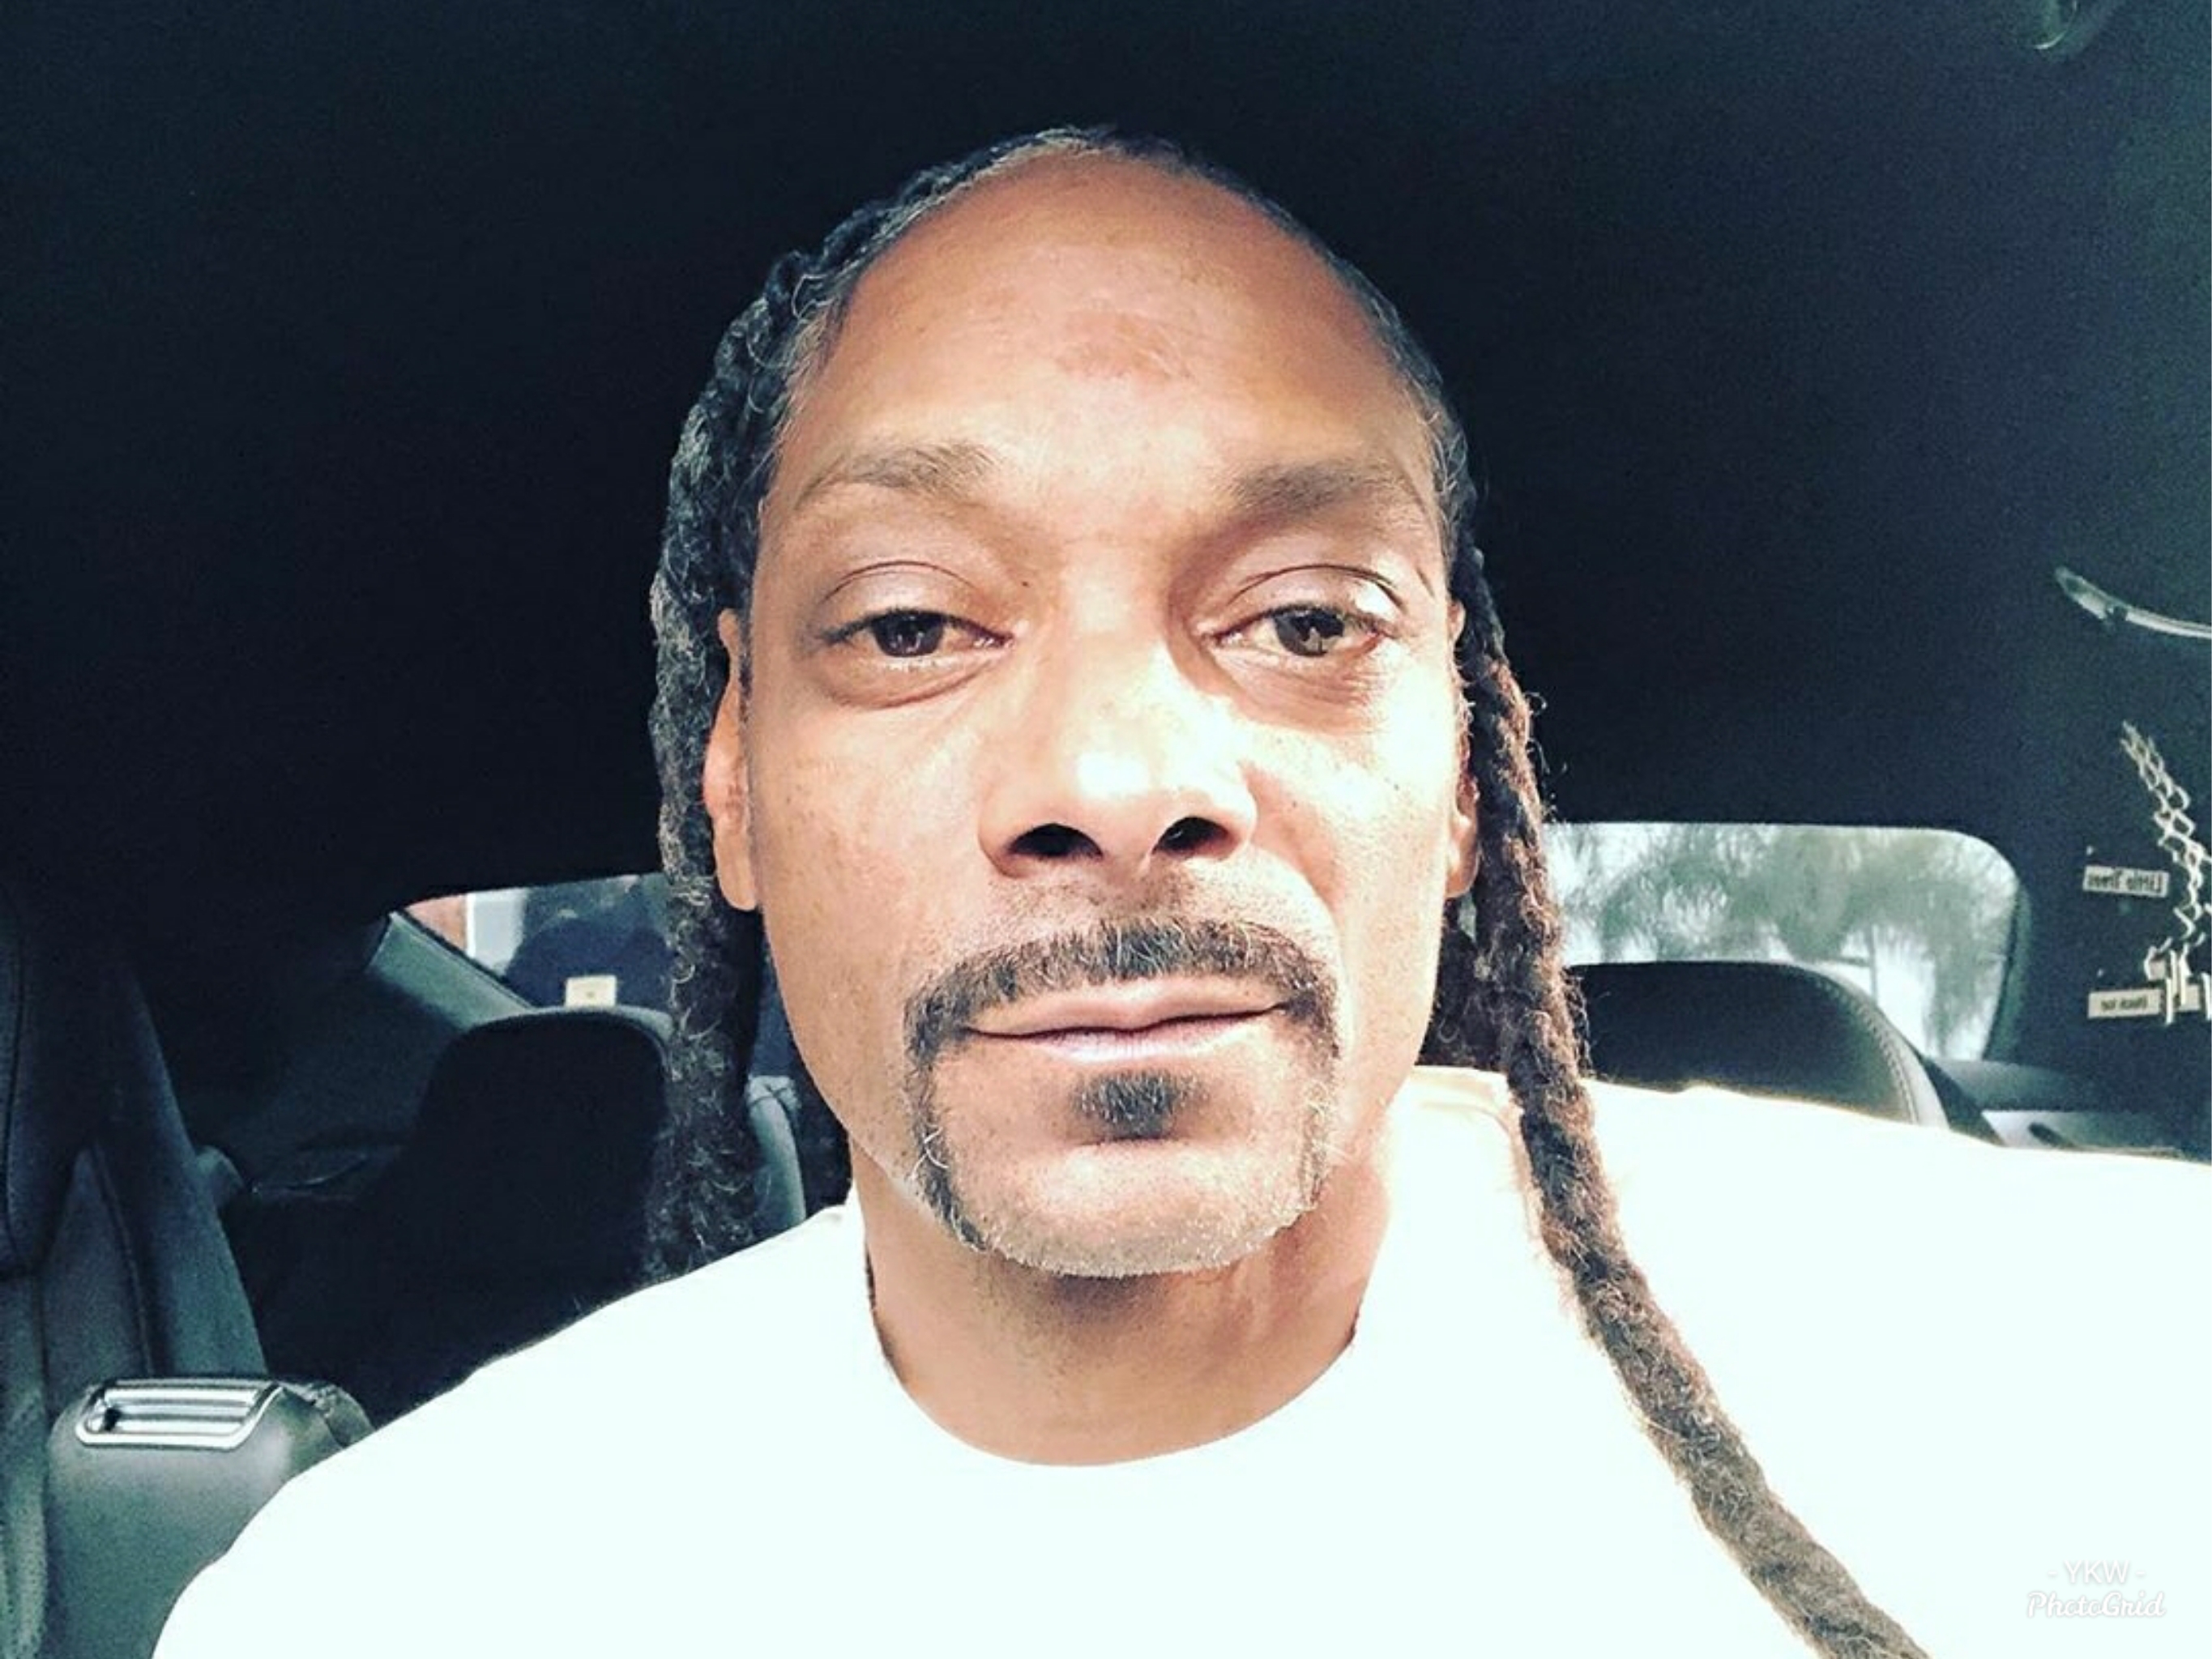 Snoop Dogg Shares He Will Be Voting For The First Time In November